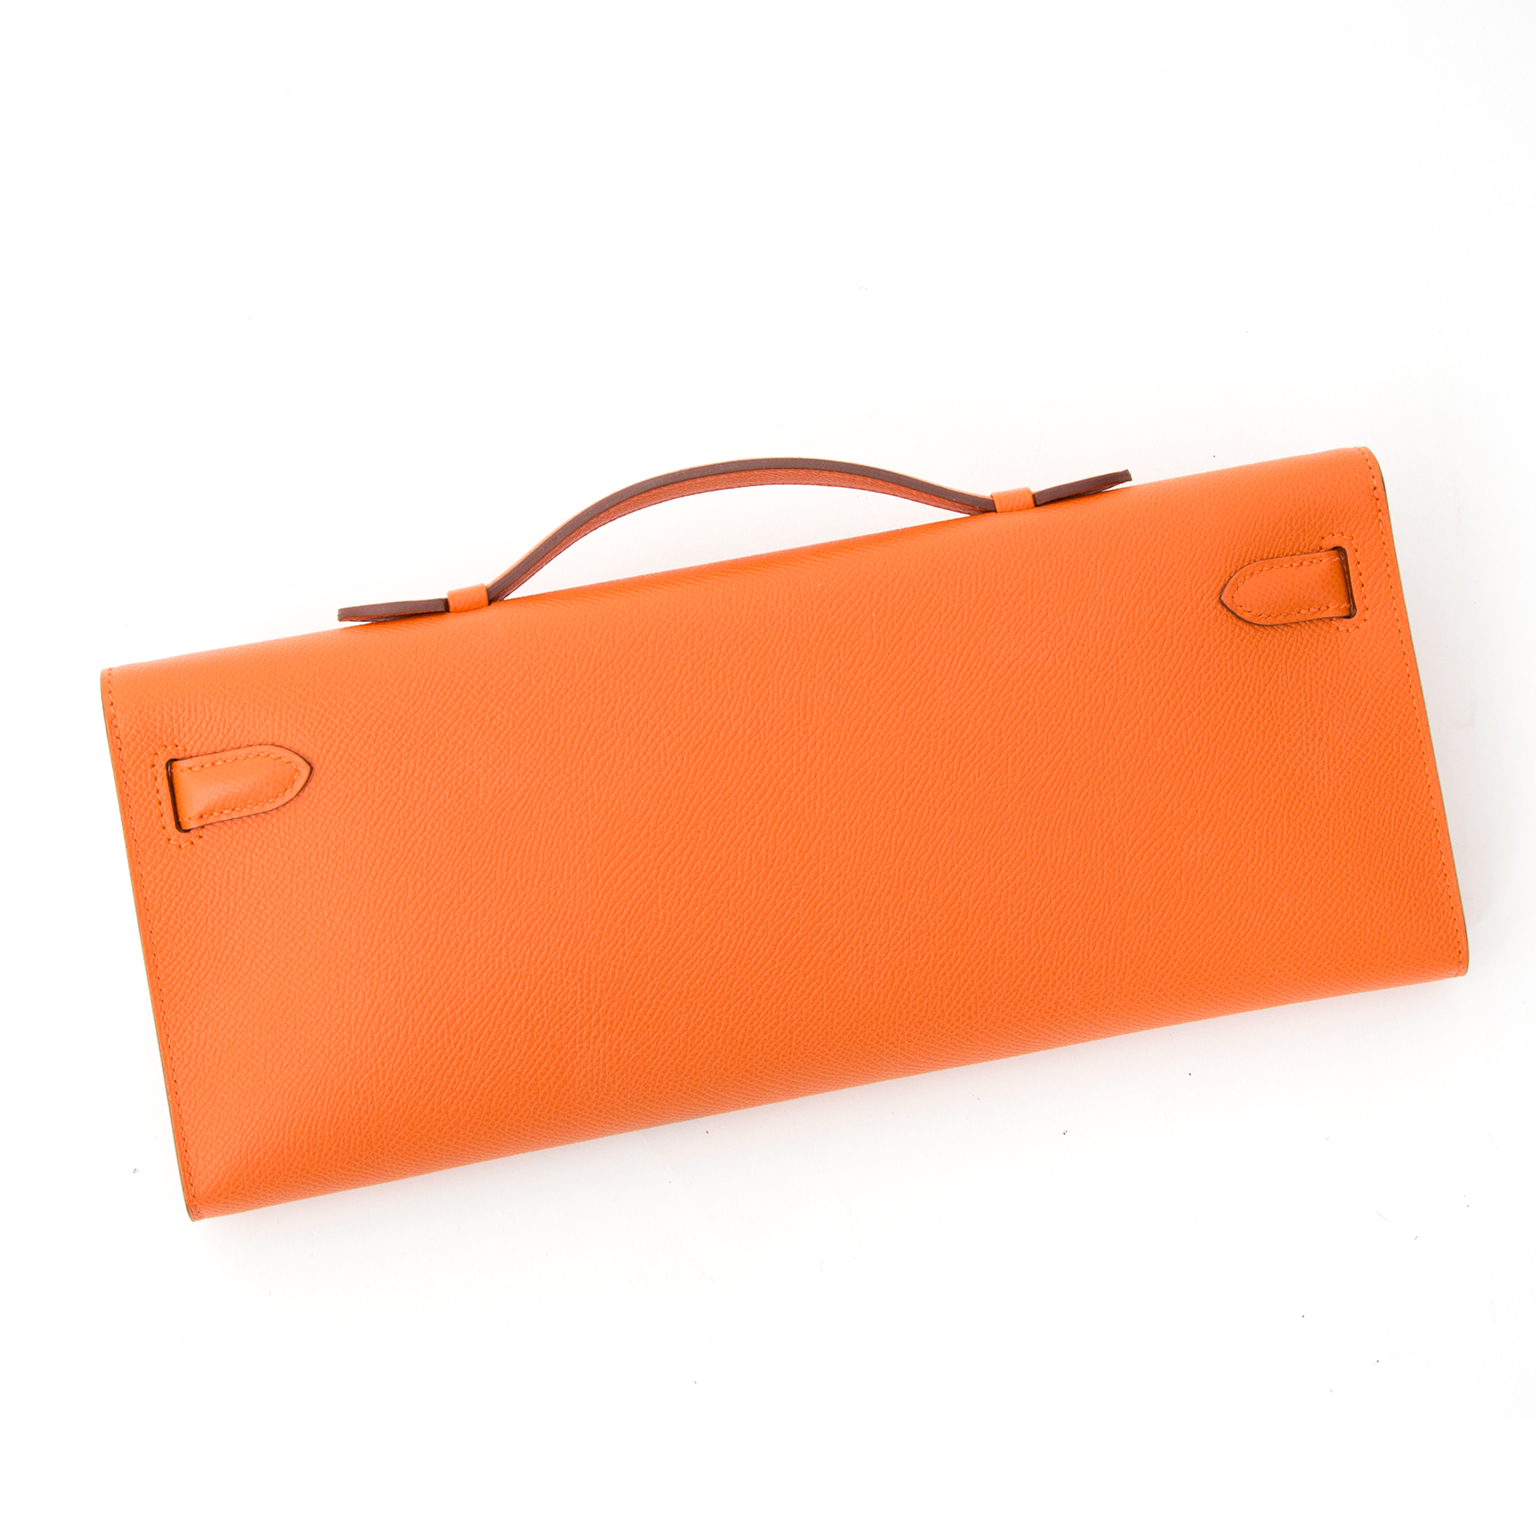 Hermès - Authenticated Kelly Cut Clutch Clutch Bag - Leather Orange Plain for Women, Very Good Condition